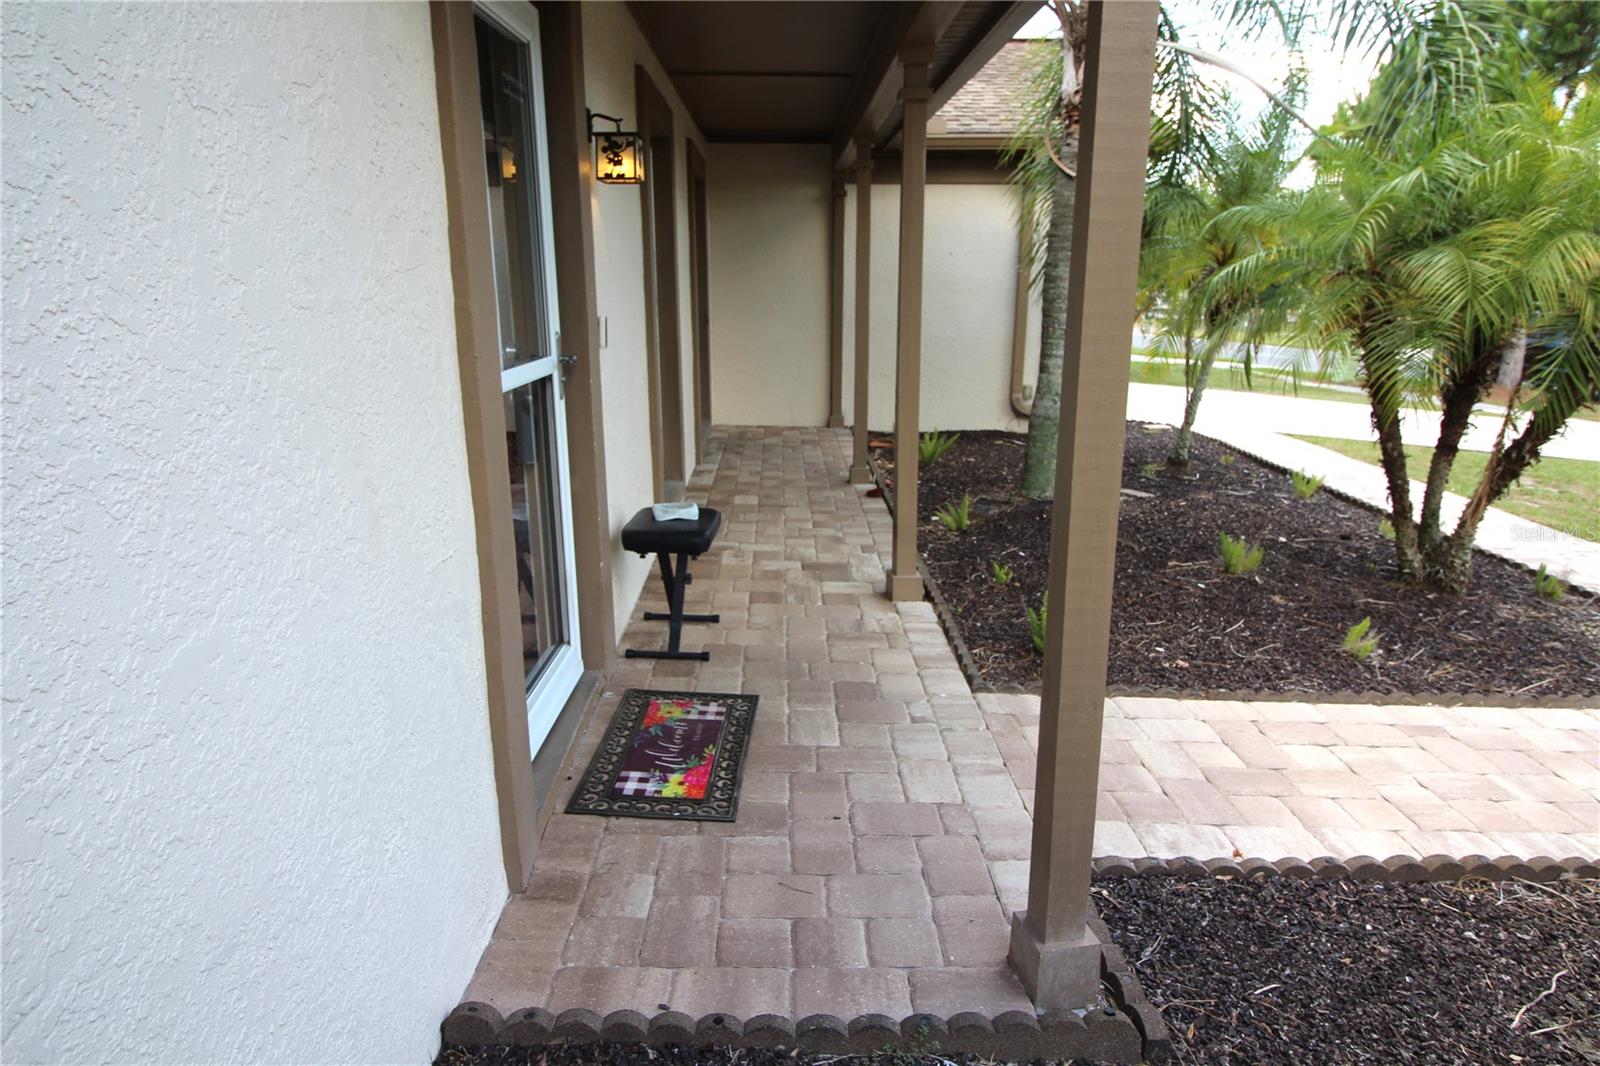 covered front porch with pavers